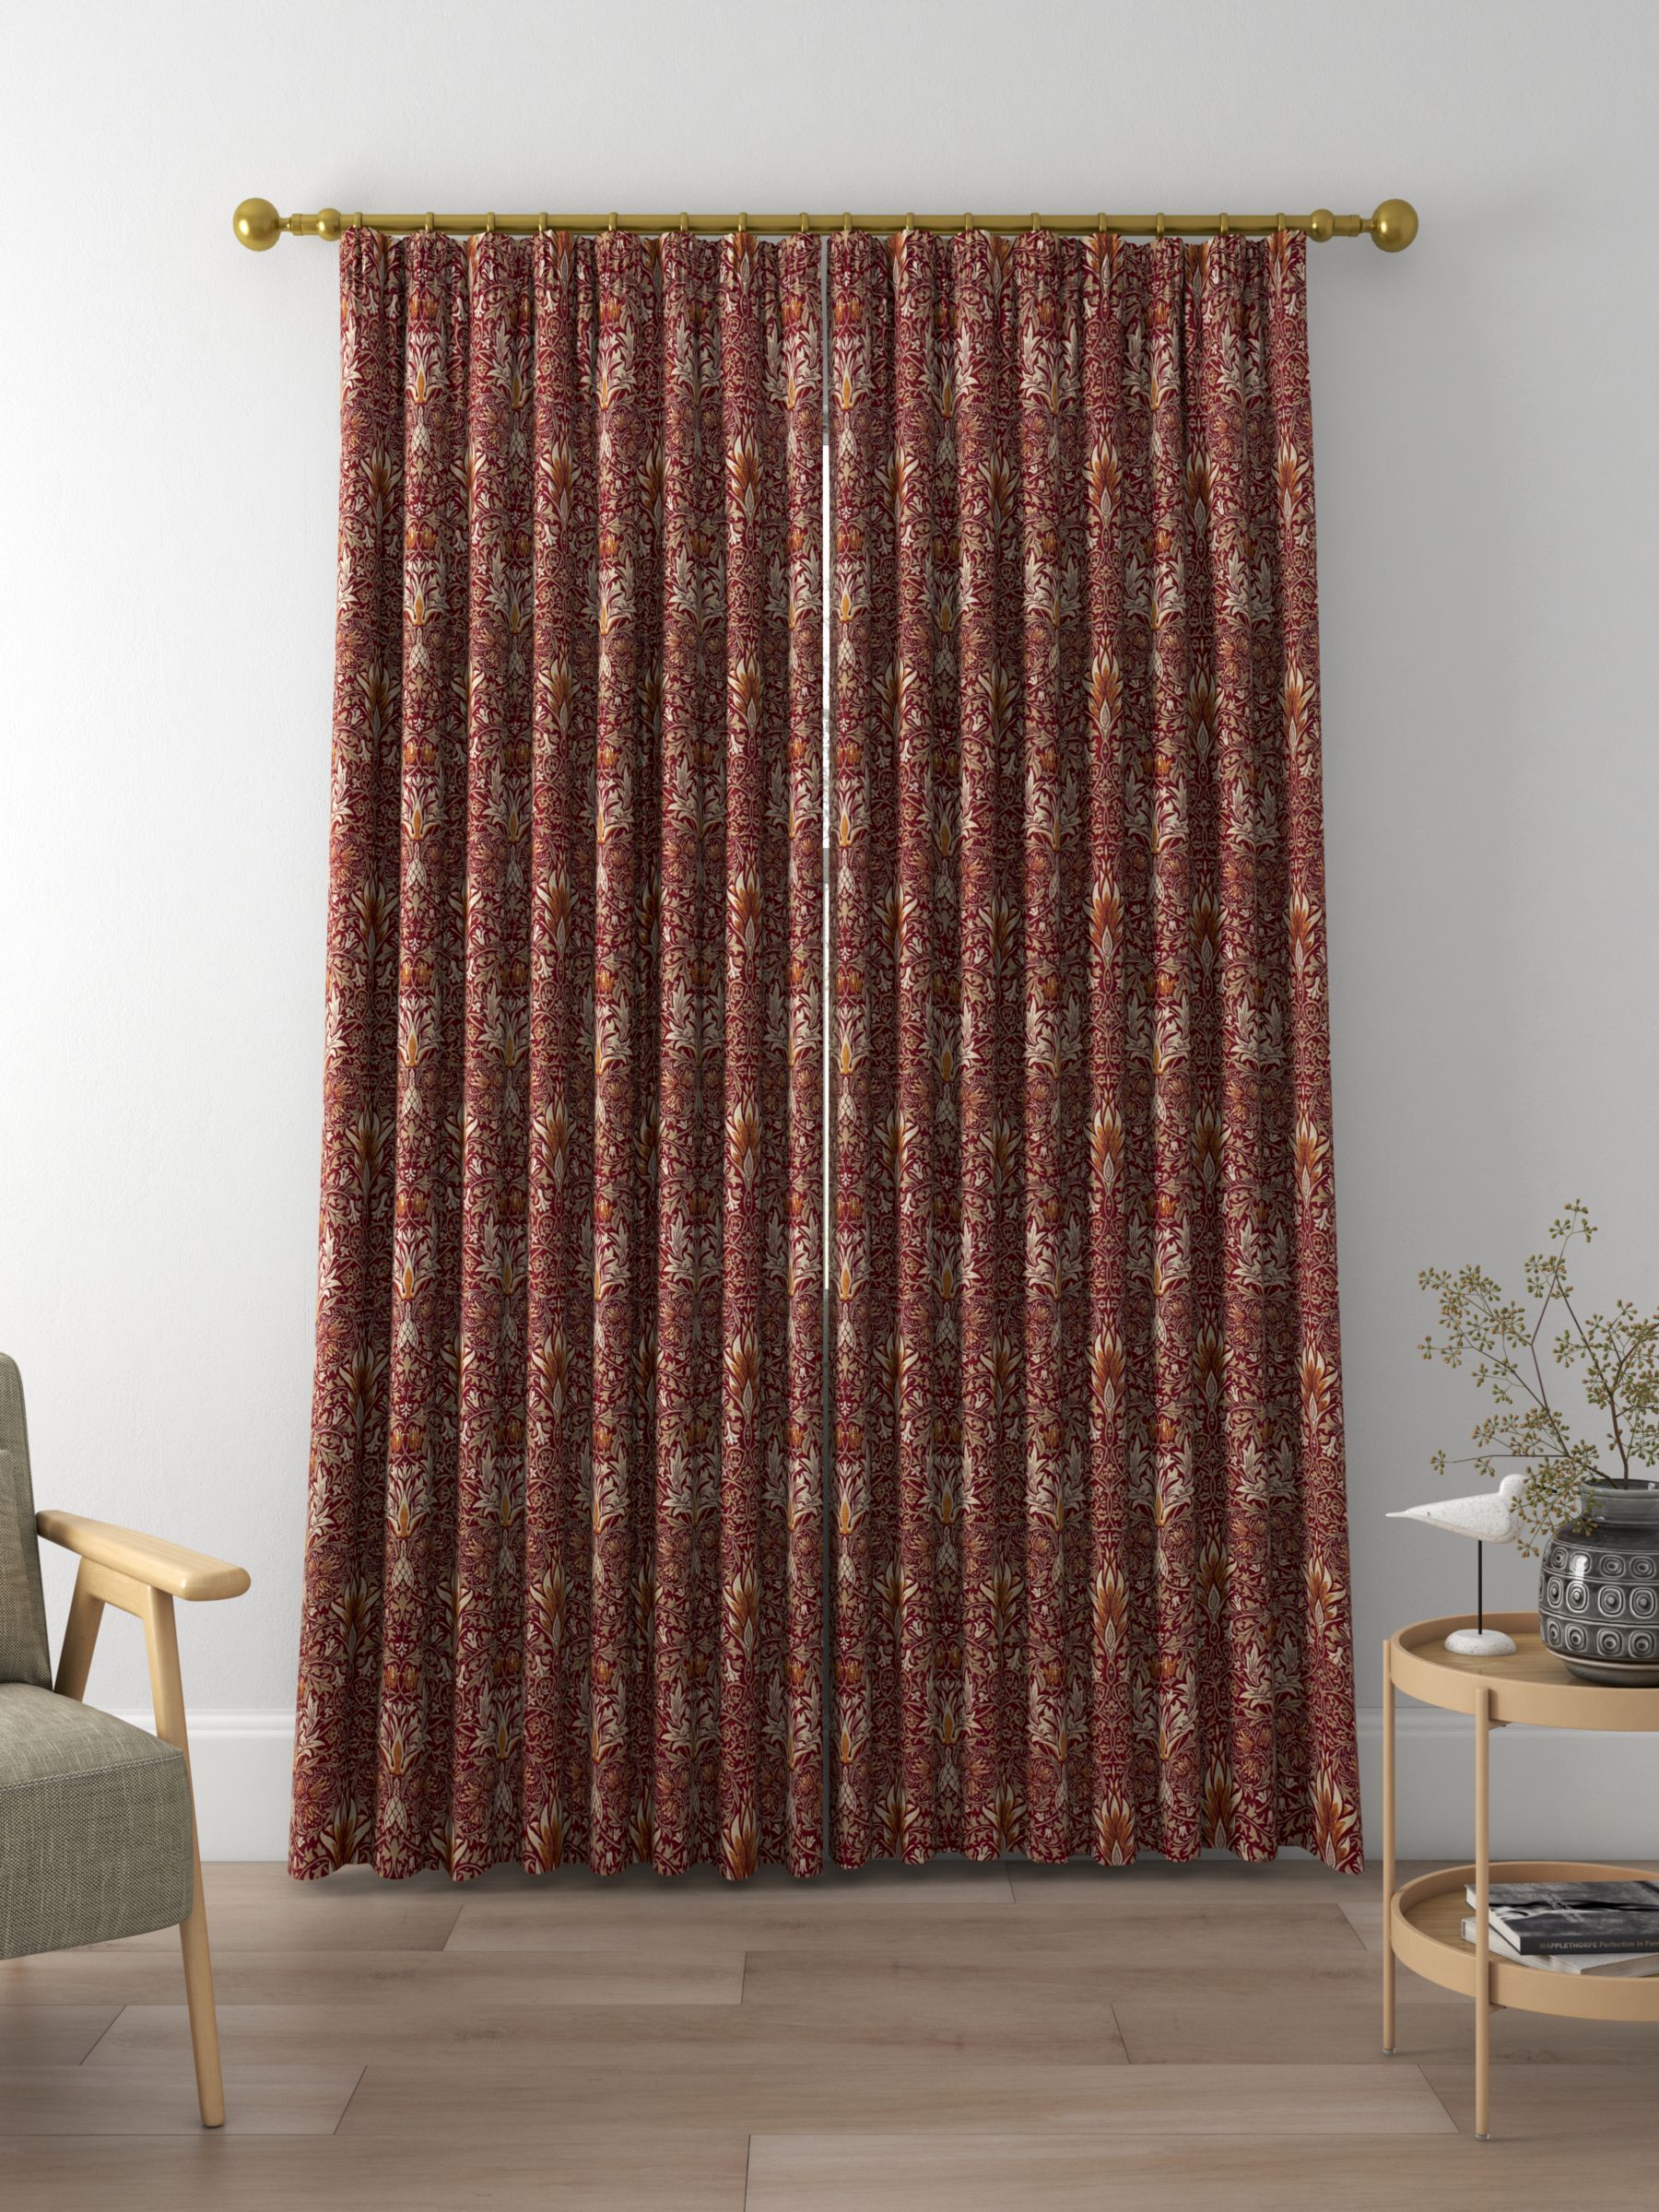 Morris & Co. Snakeshead Made to Measure Curtains, Claret/Gold